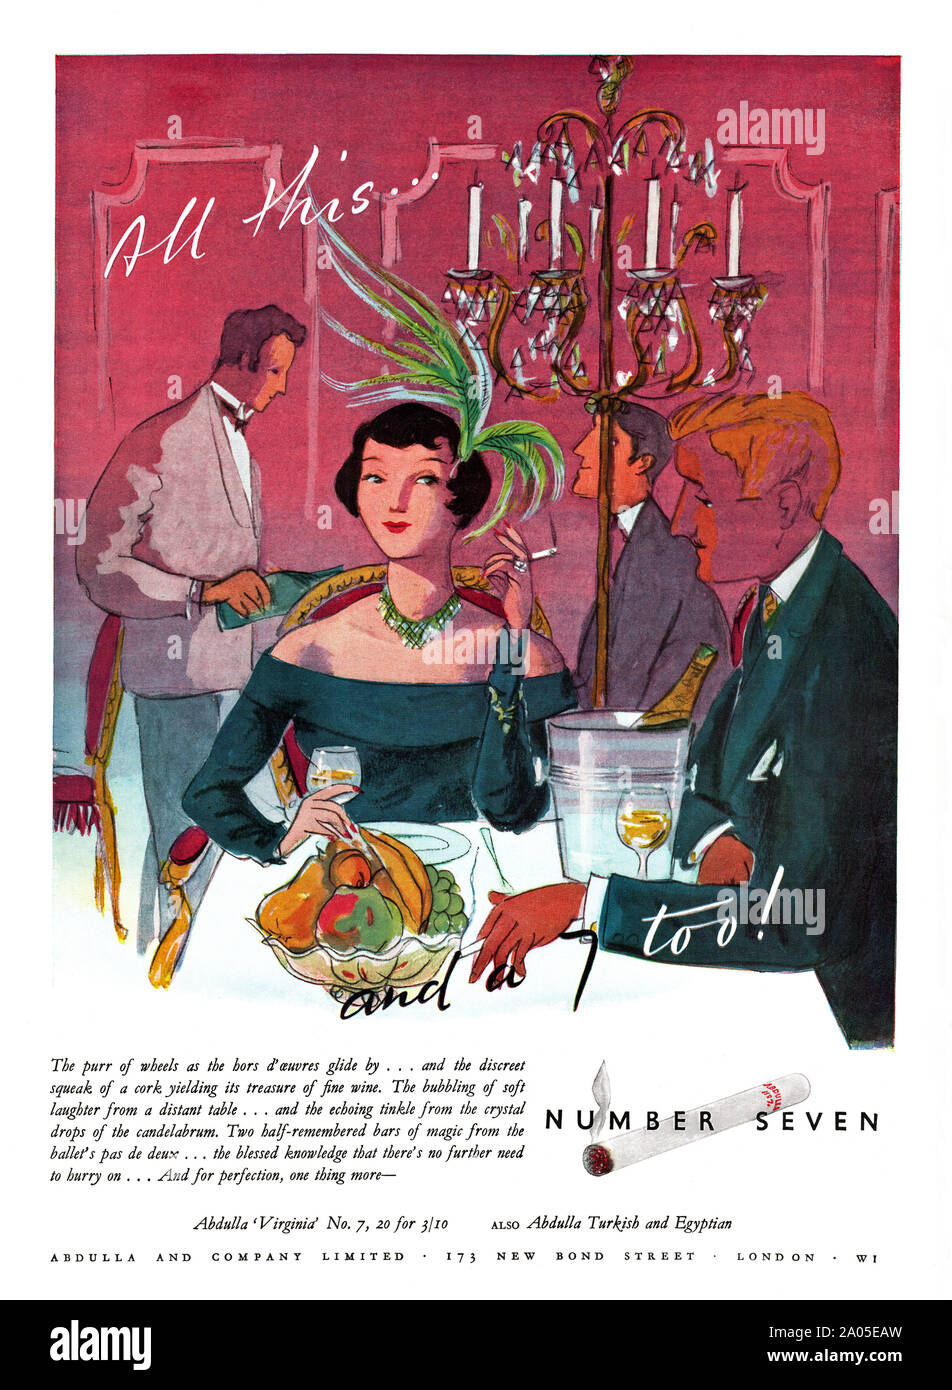 Advert for Abdulla Number 7 cigarettes, 1951. The illustration shows a sophisticated, upmarket couple drinking wine. The Abdulla company was founded in London, England in 1902. It was most famous for its eponymous cigarette brand. Stock Photo